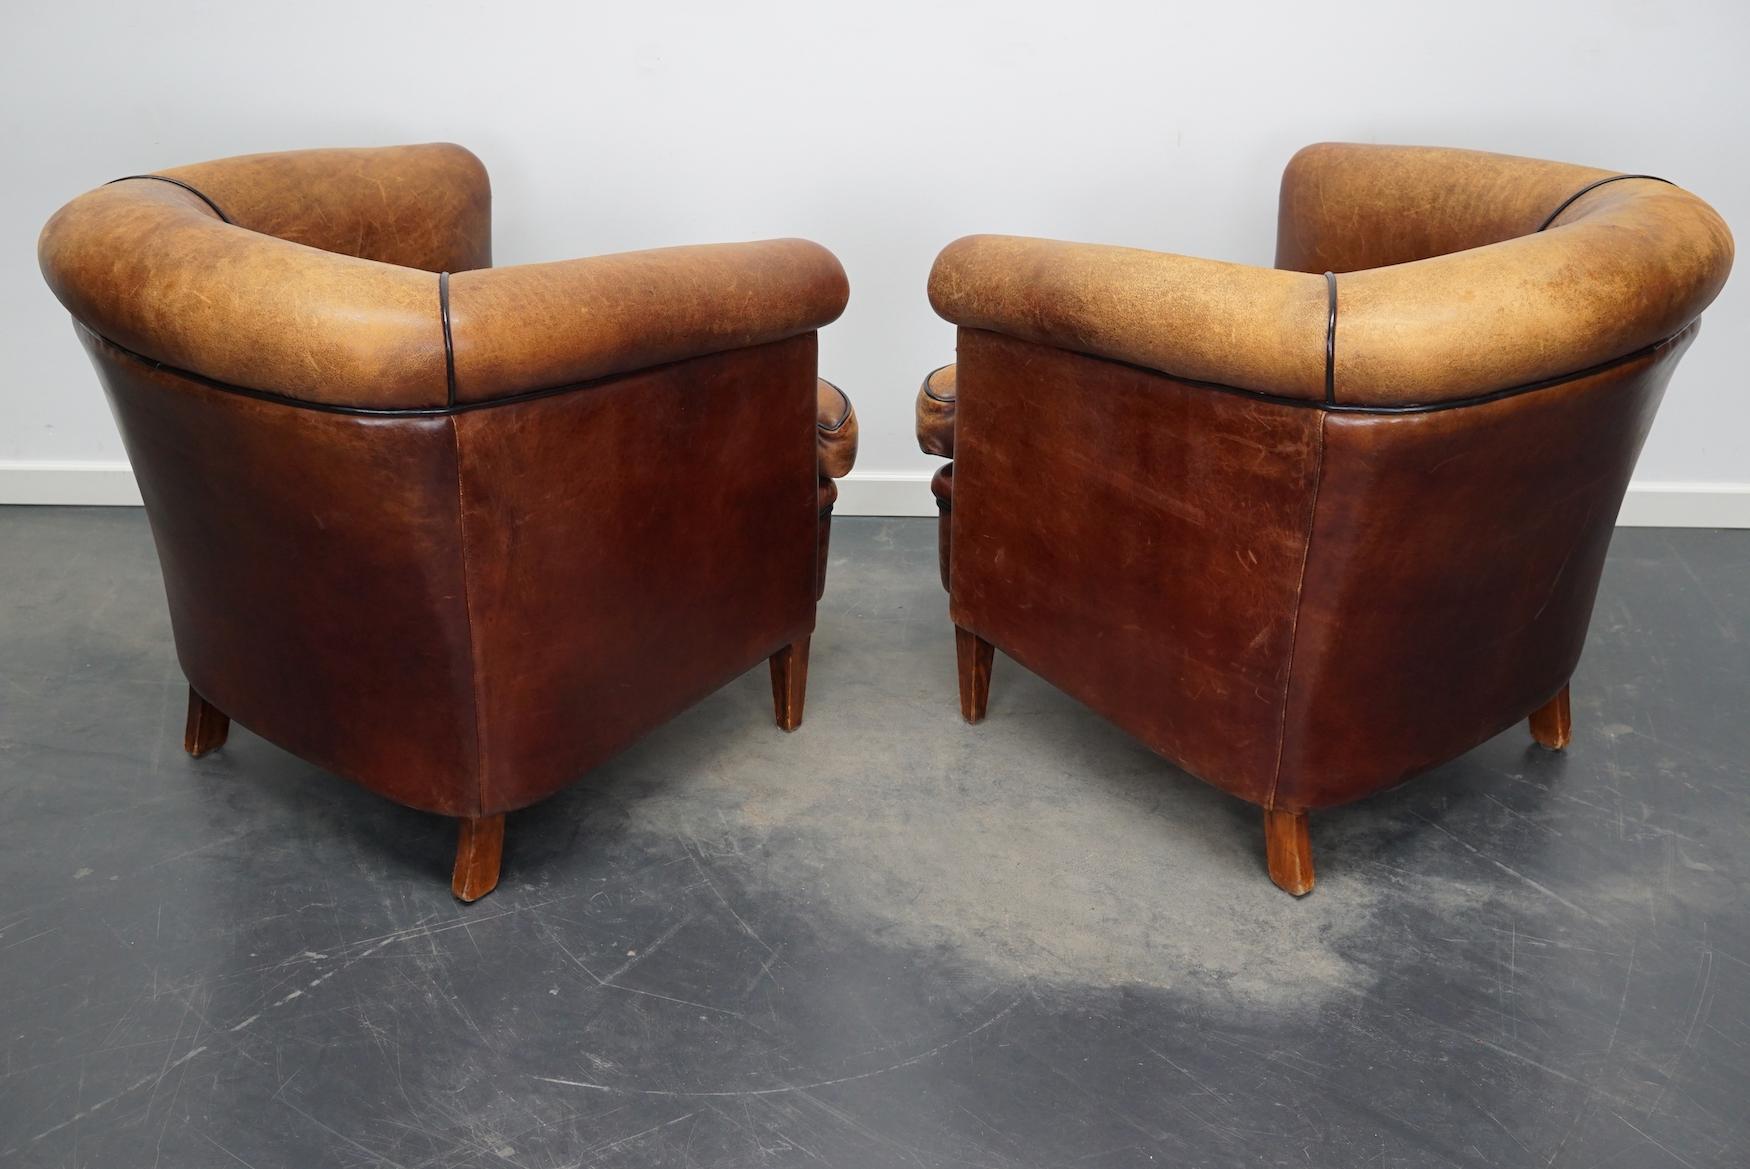 This pair of cognac-colored leather club chairs come from the Netherlands. They are upholstered with hand patinated leather and feature nails and wooden legs.